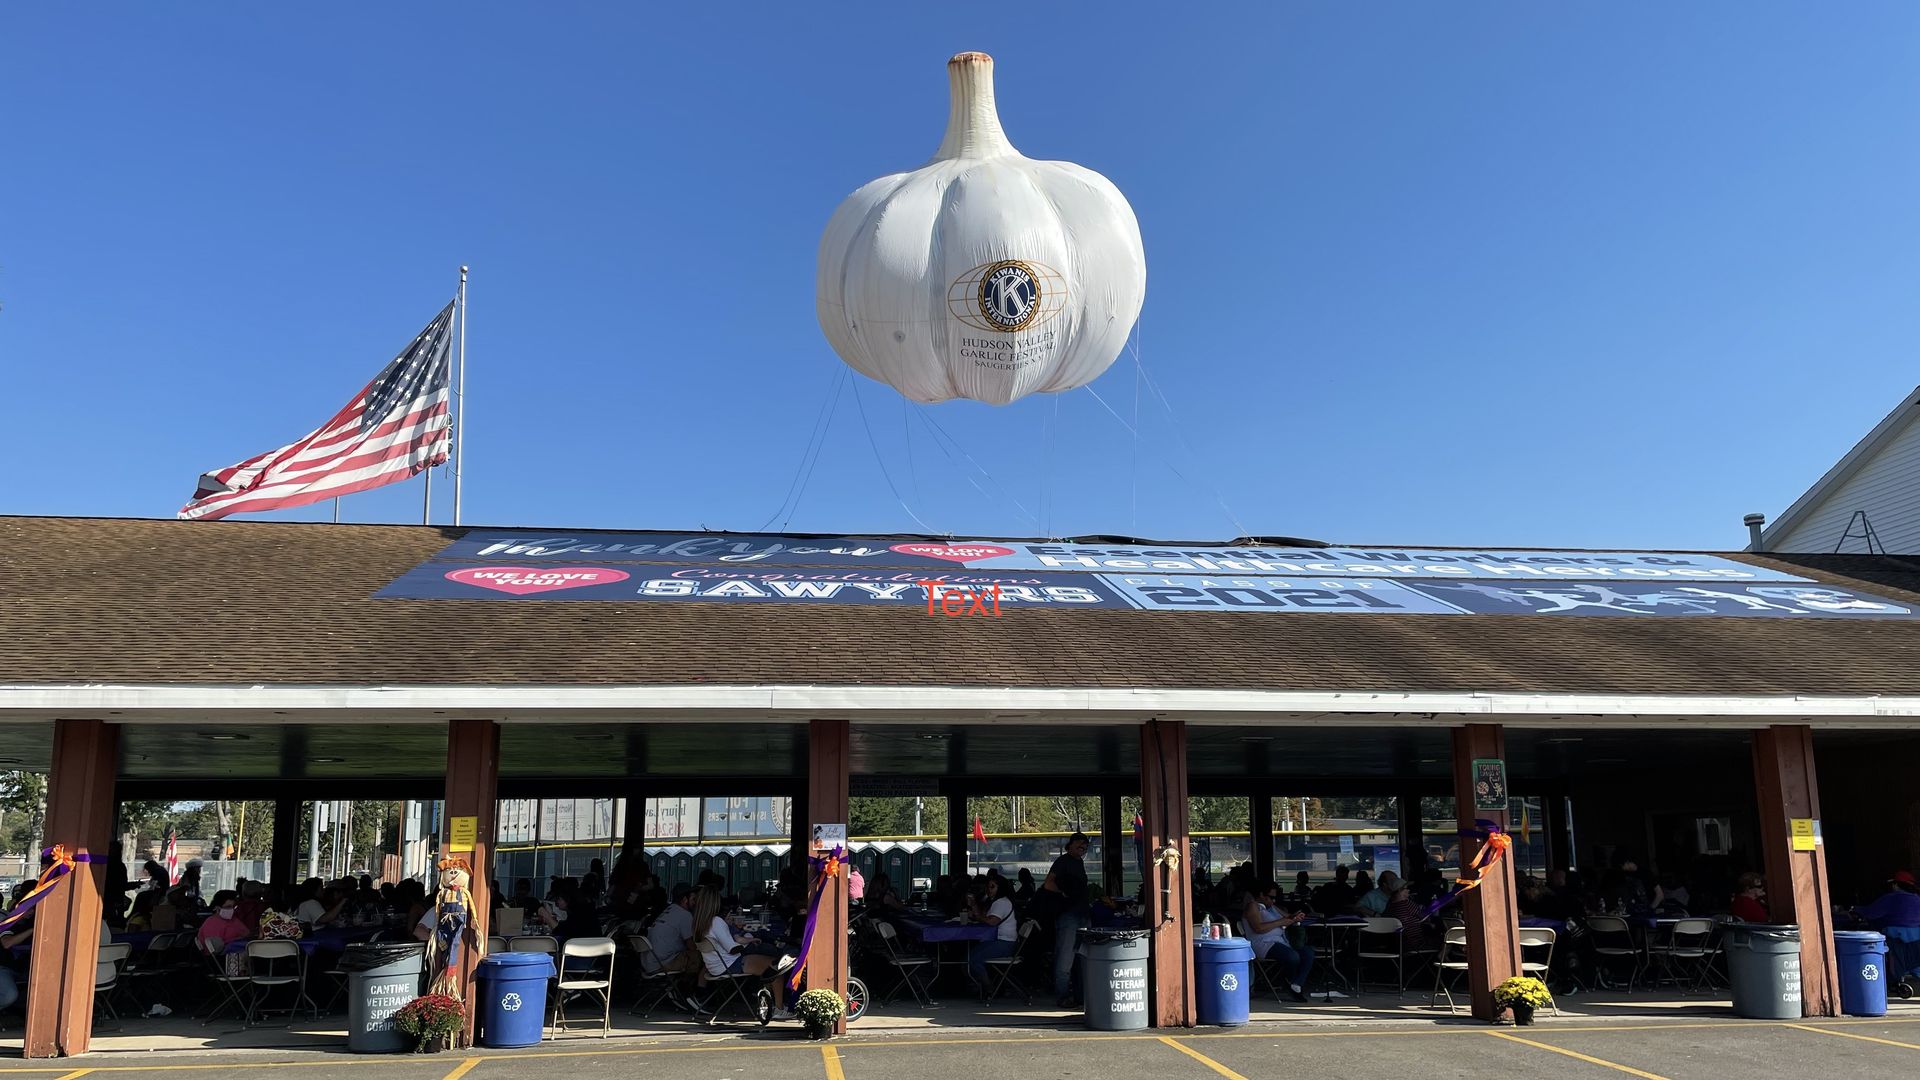 A large inflatable garlic bulb flying over a shed-style building alongside an American flag.